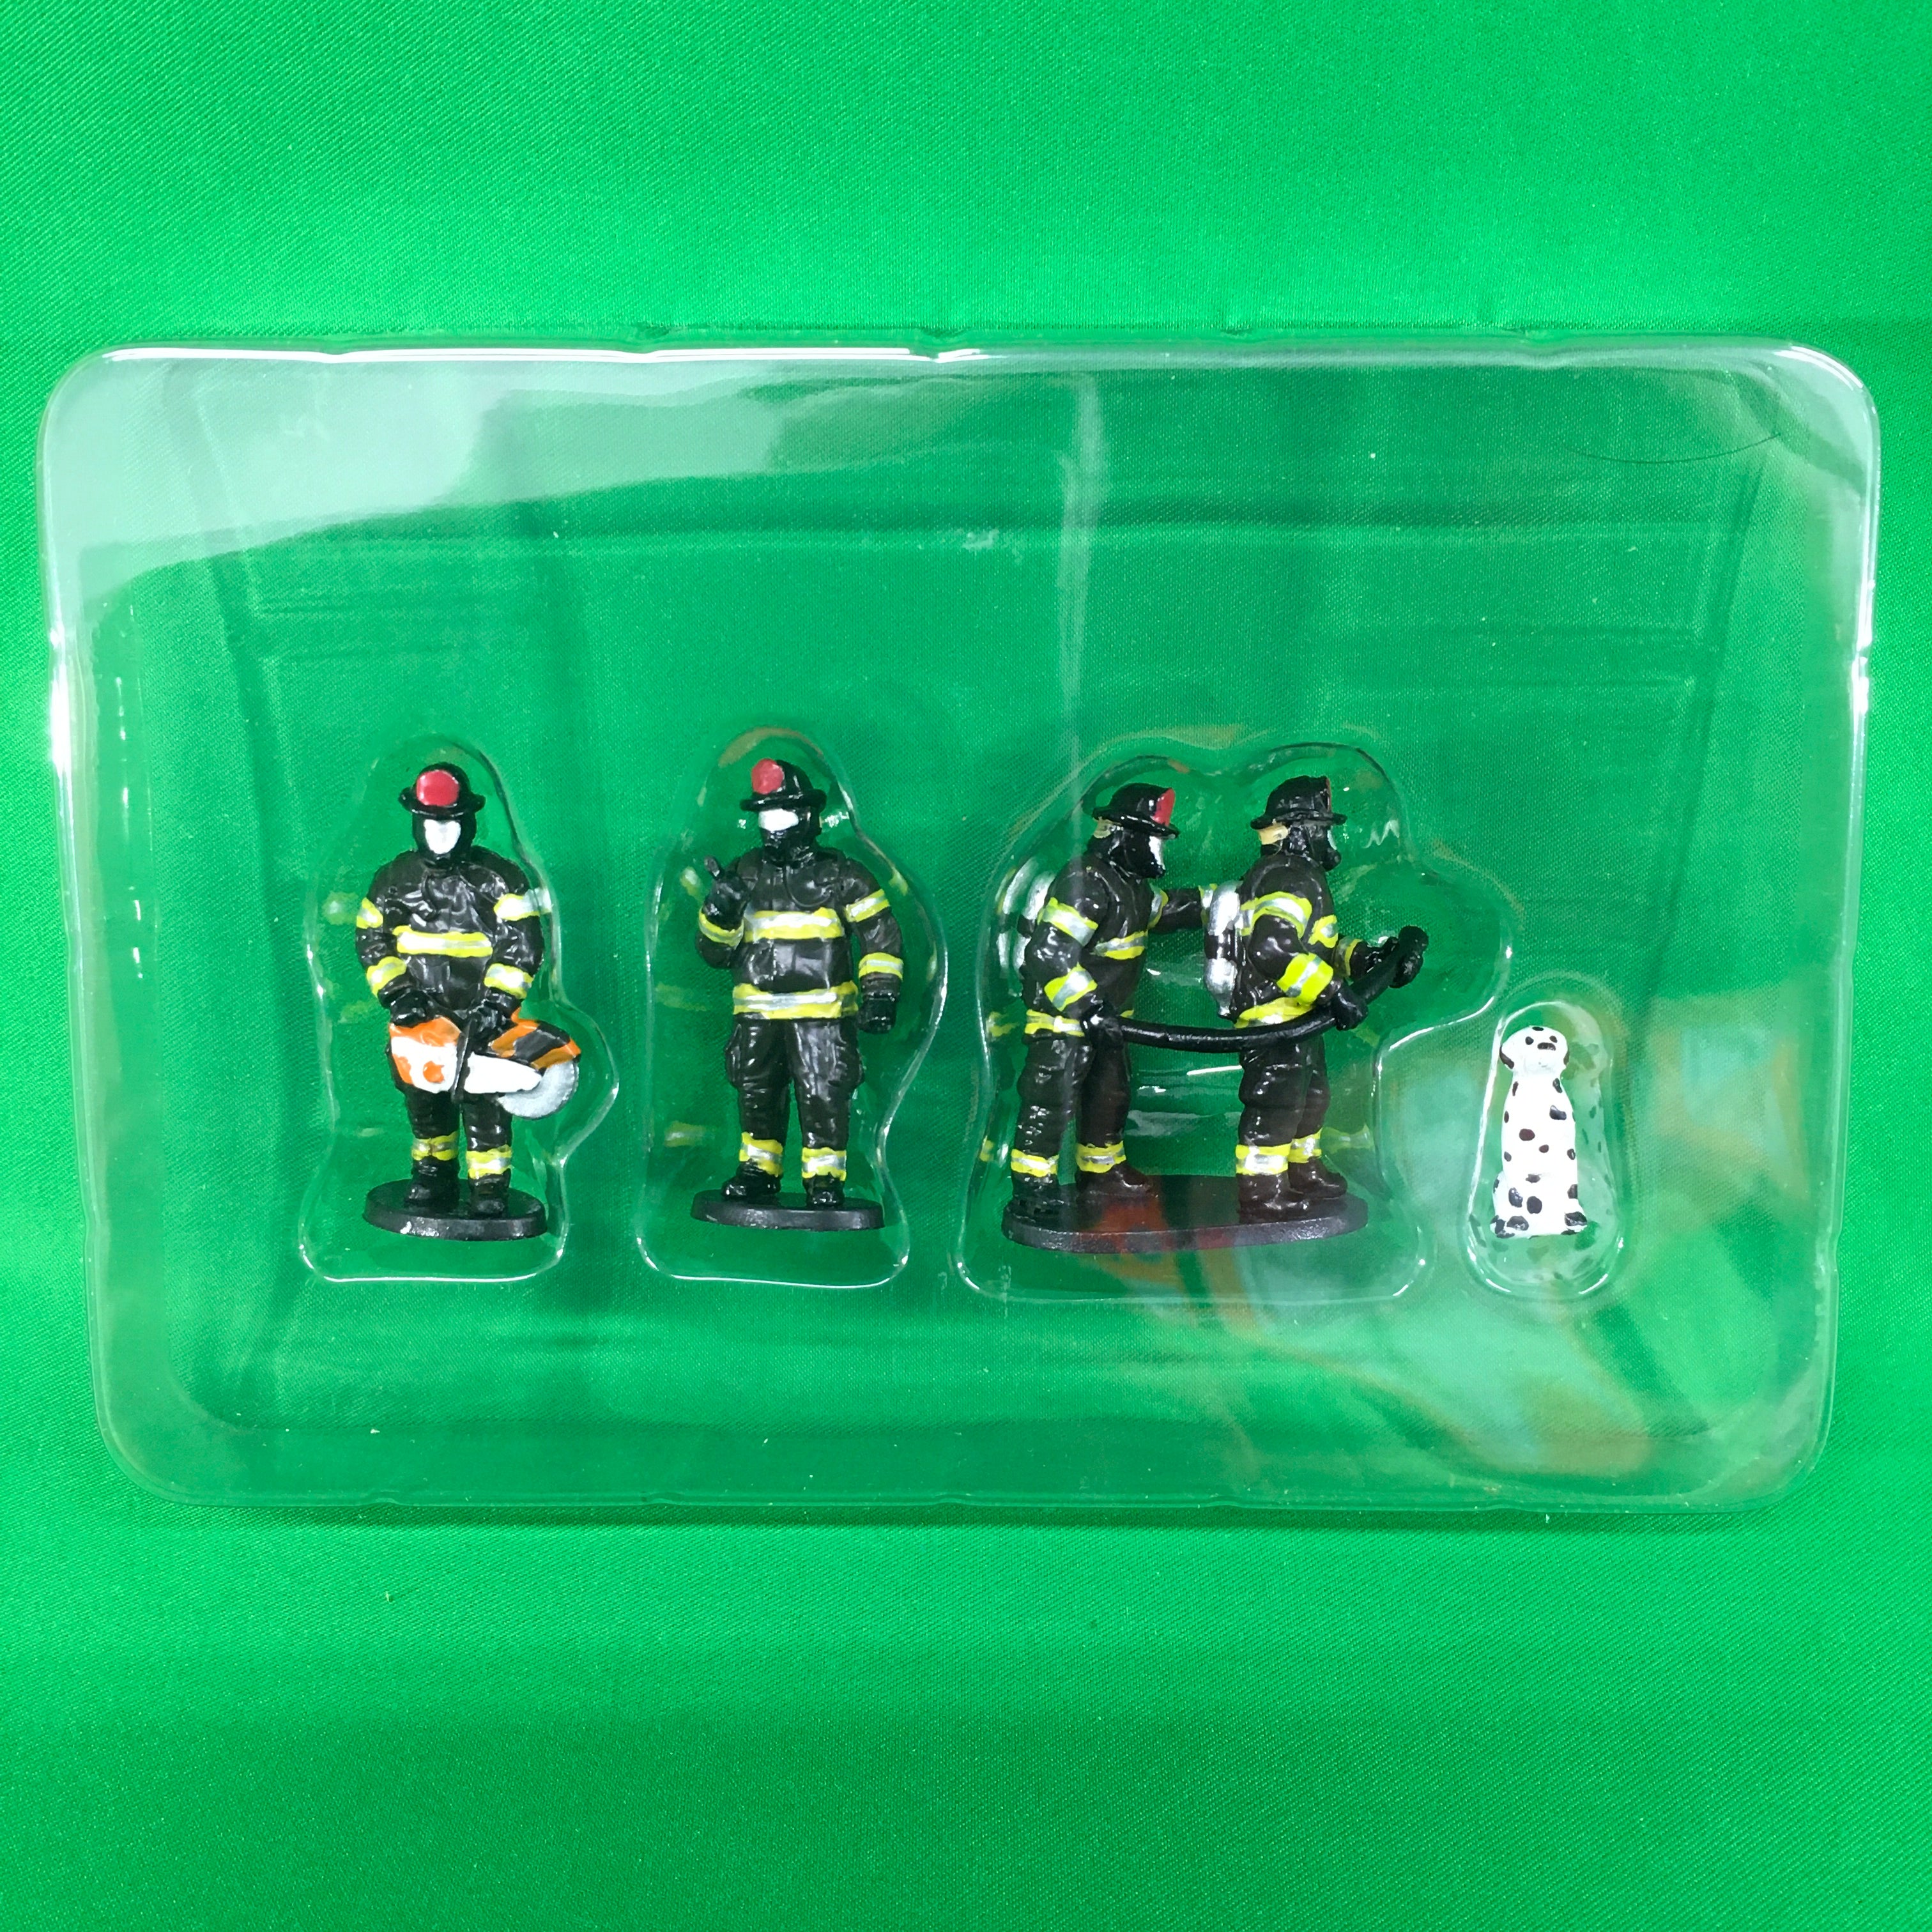 Lionel 2230180 - Firefighter Figures and Dog (4-Pack)